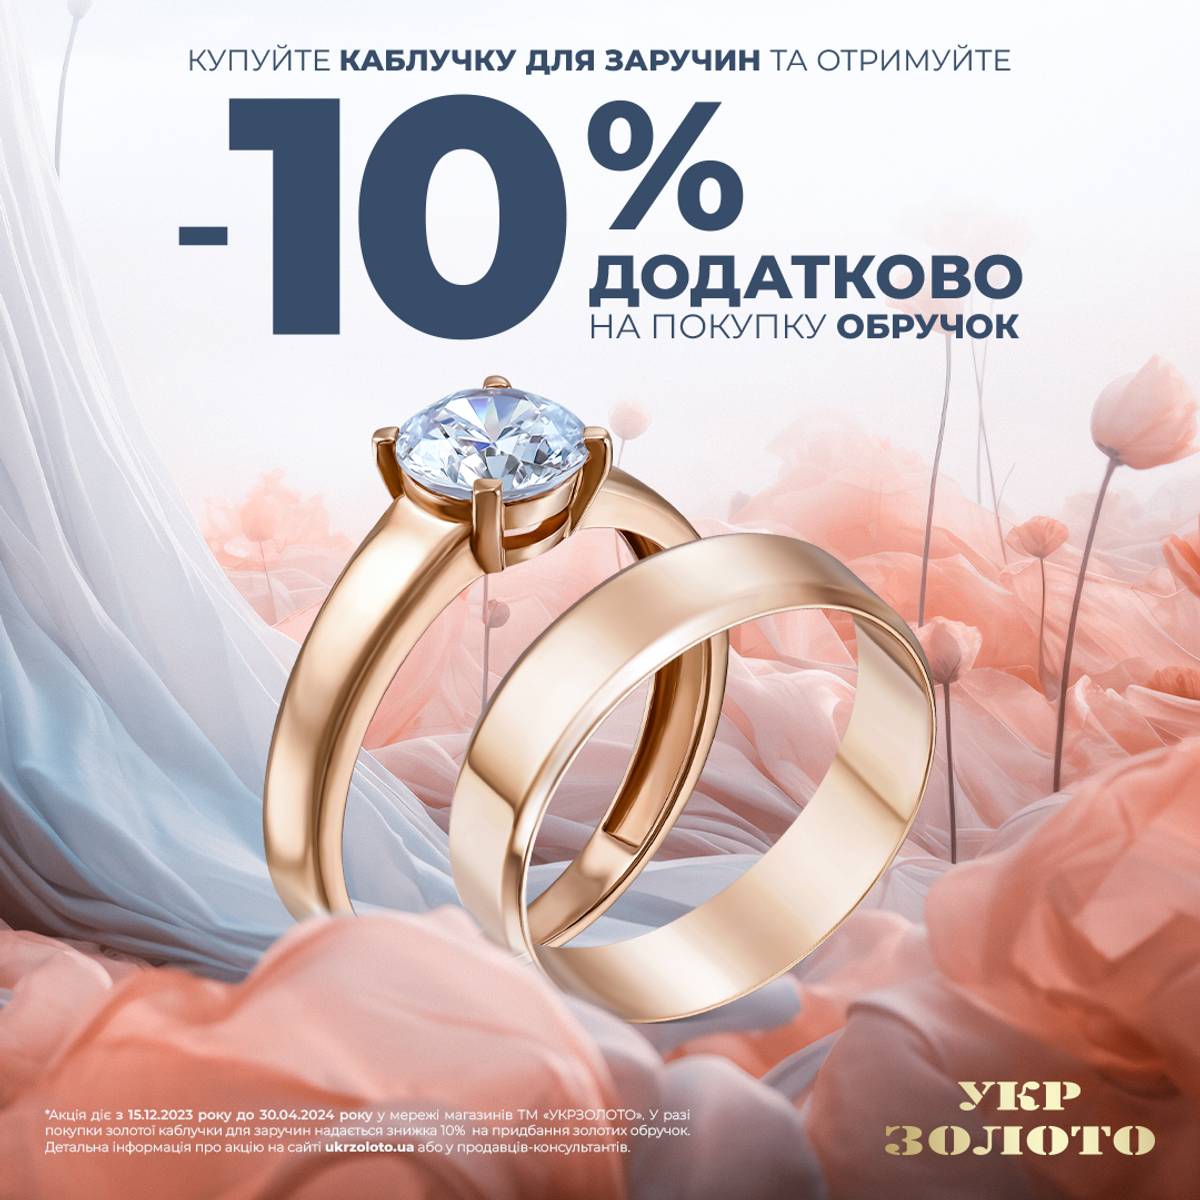 Create a special day together with "Ukrzoloto"!